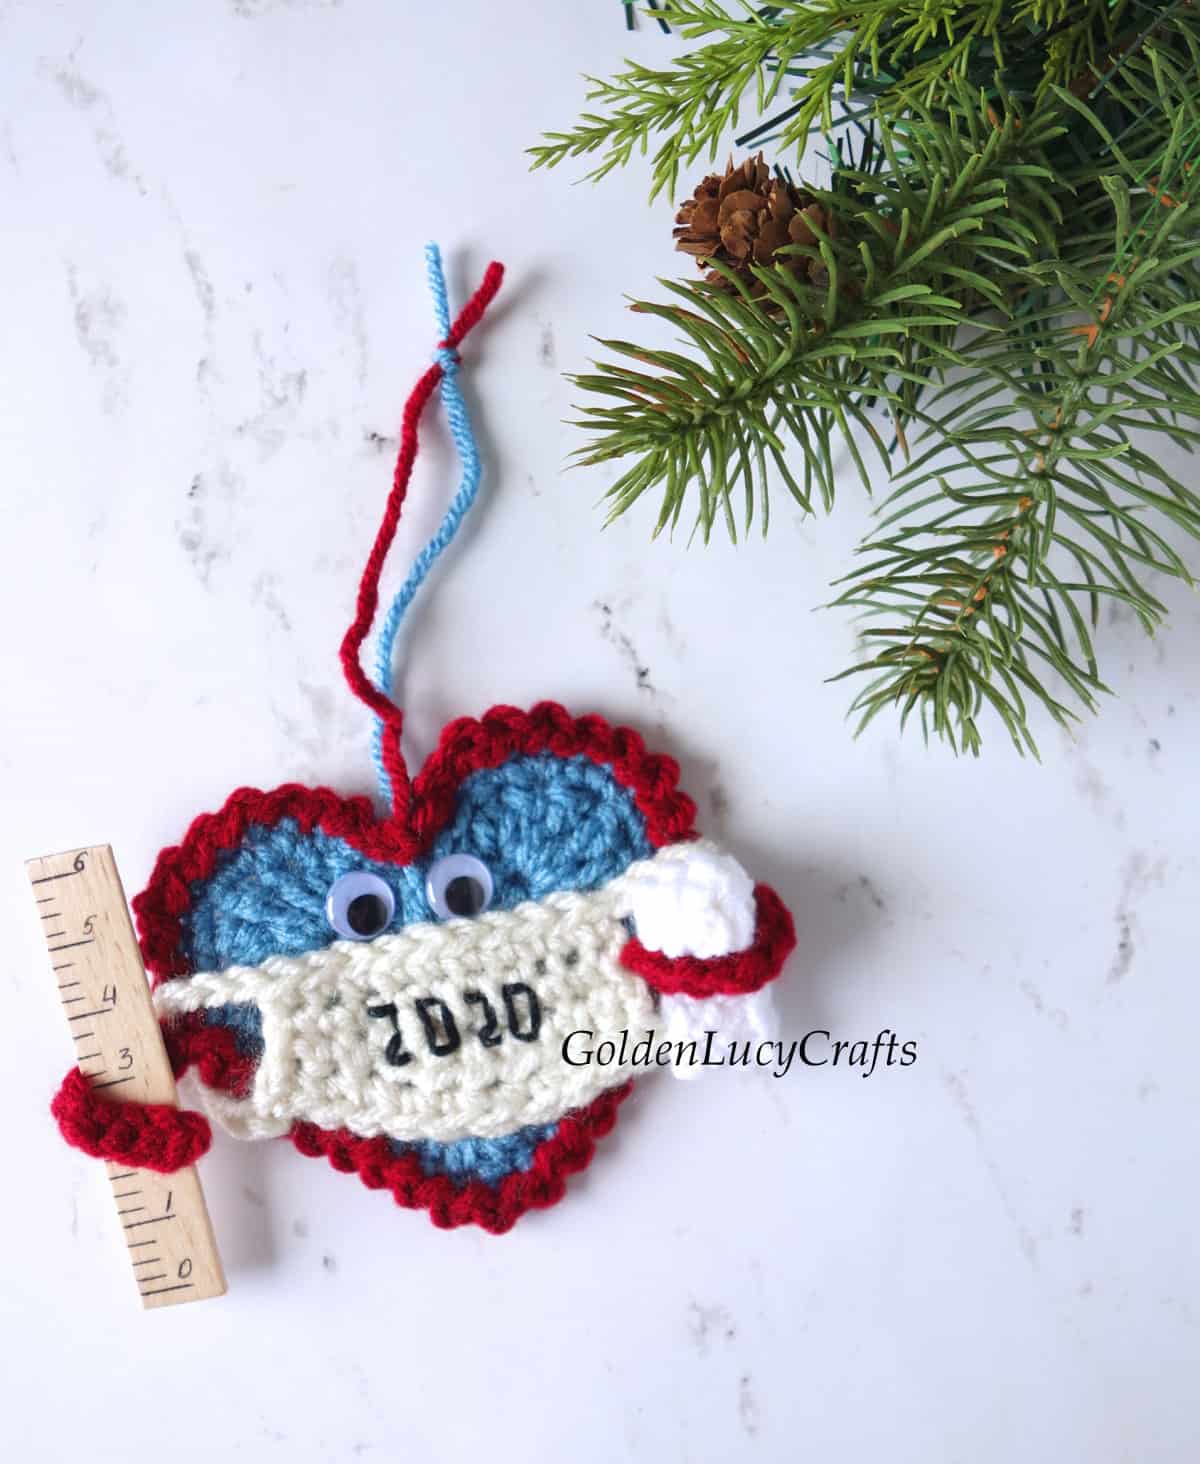 Crochet Christmas 2020 ornament. The ornament is a Heart wearing a mask and holding a ruler in one arm and a toilet paper roll in the other.